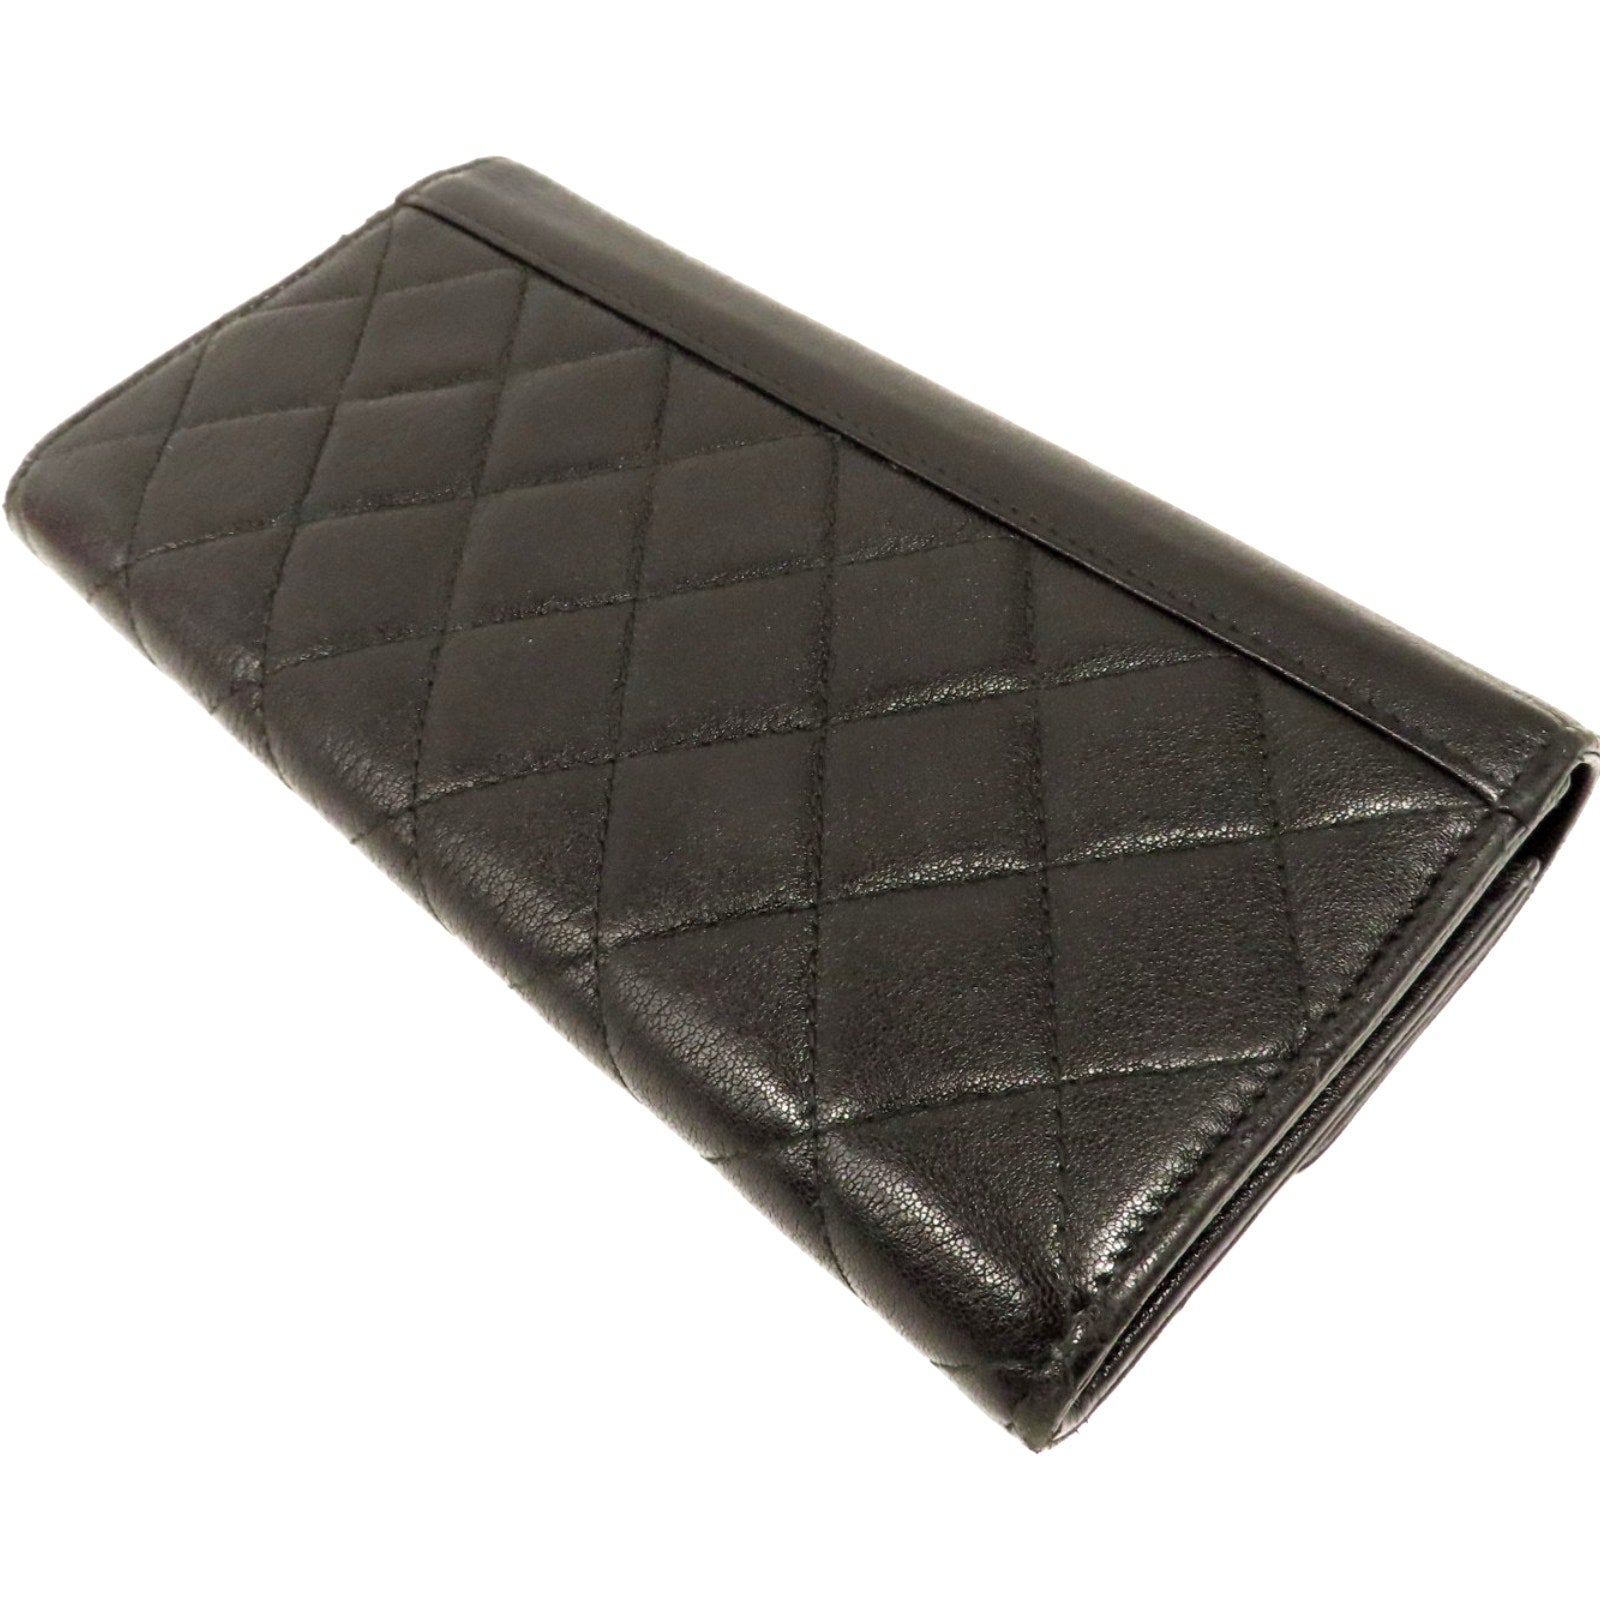 Authentic CHANEL Quilted Long Wallet Leather Black